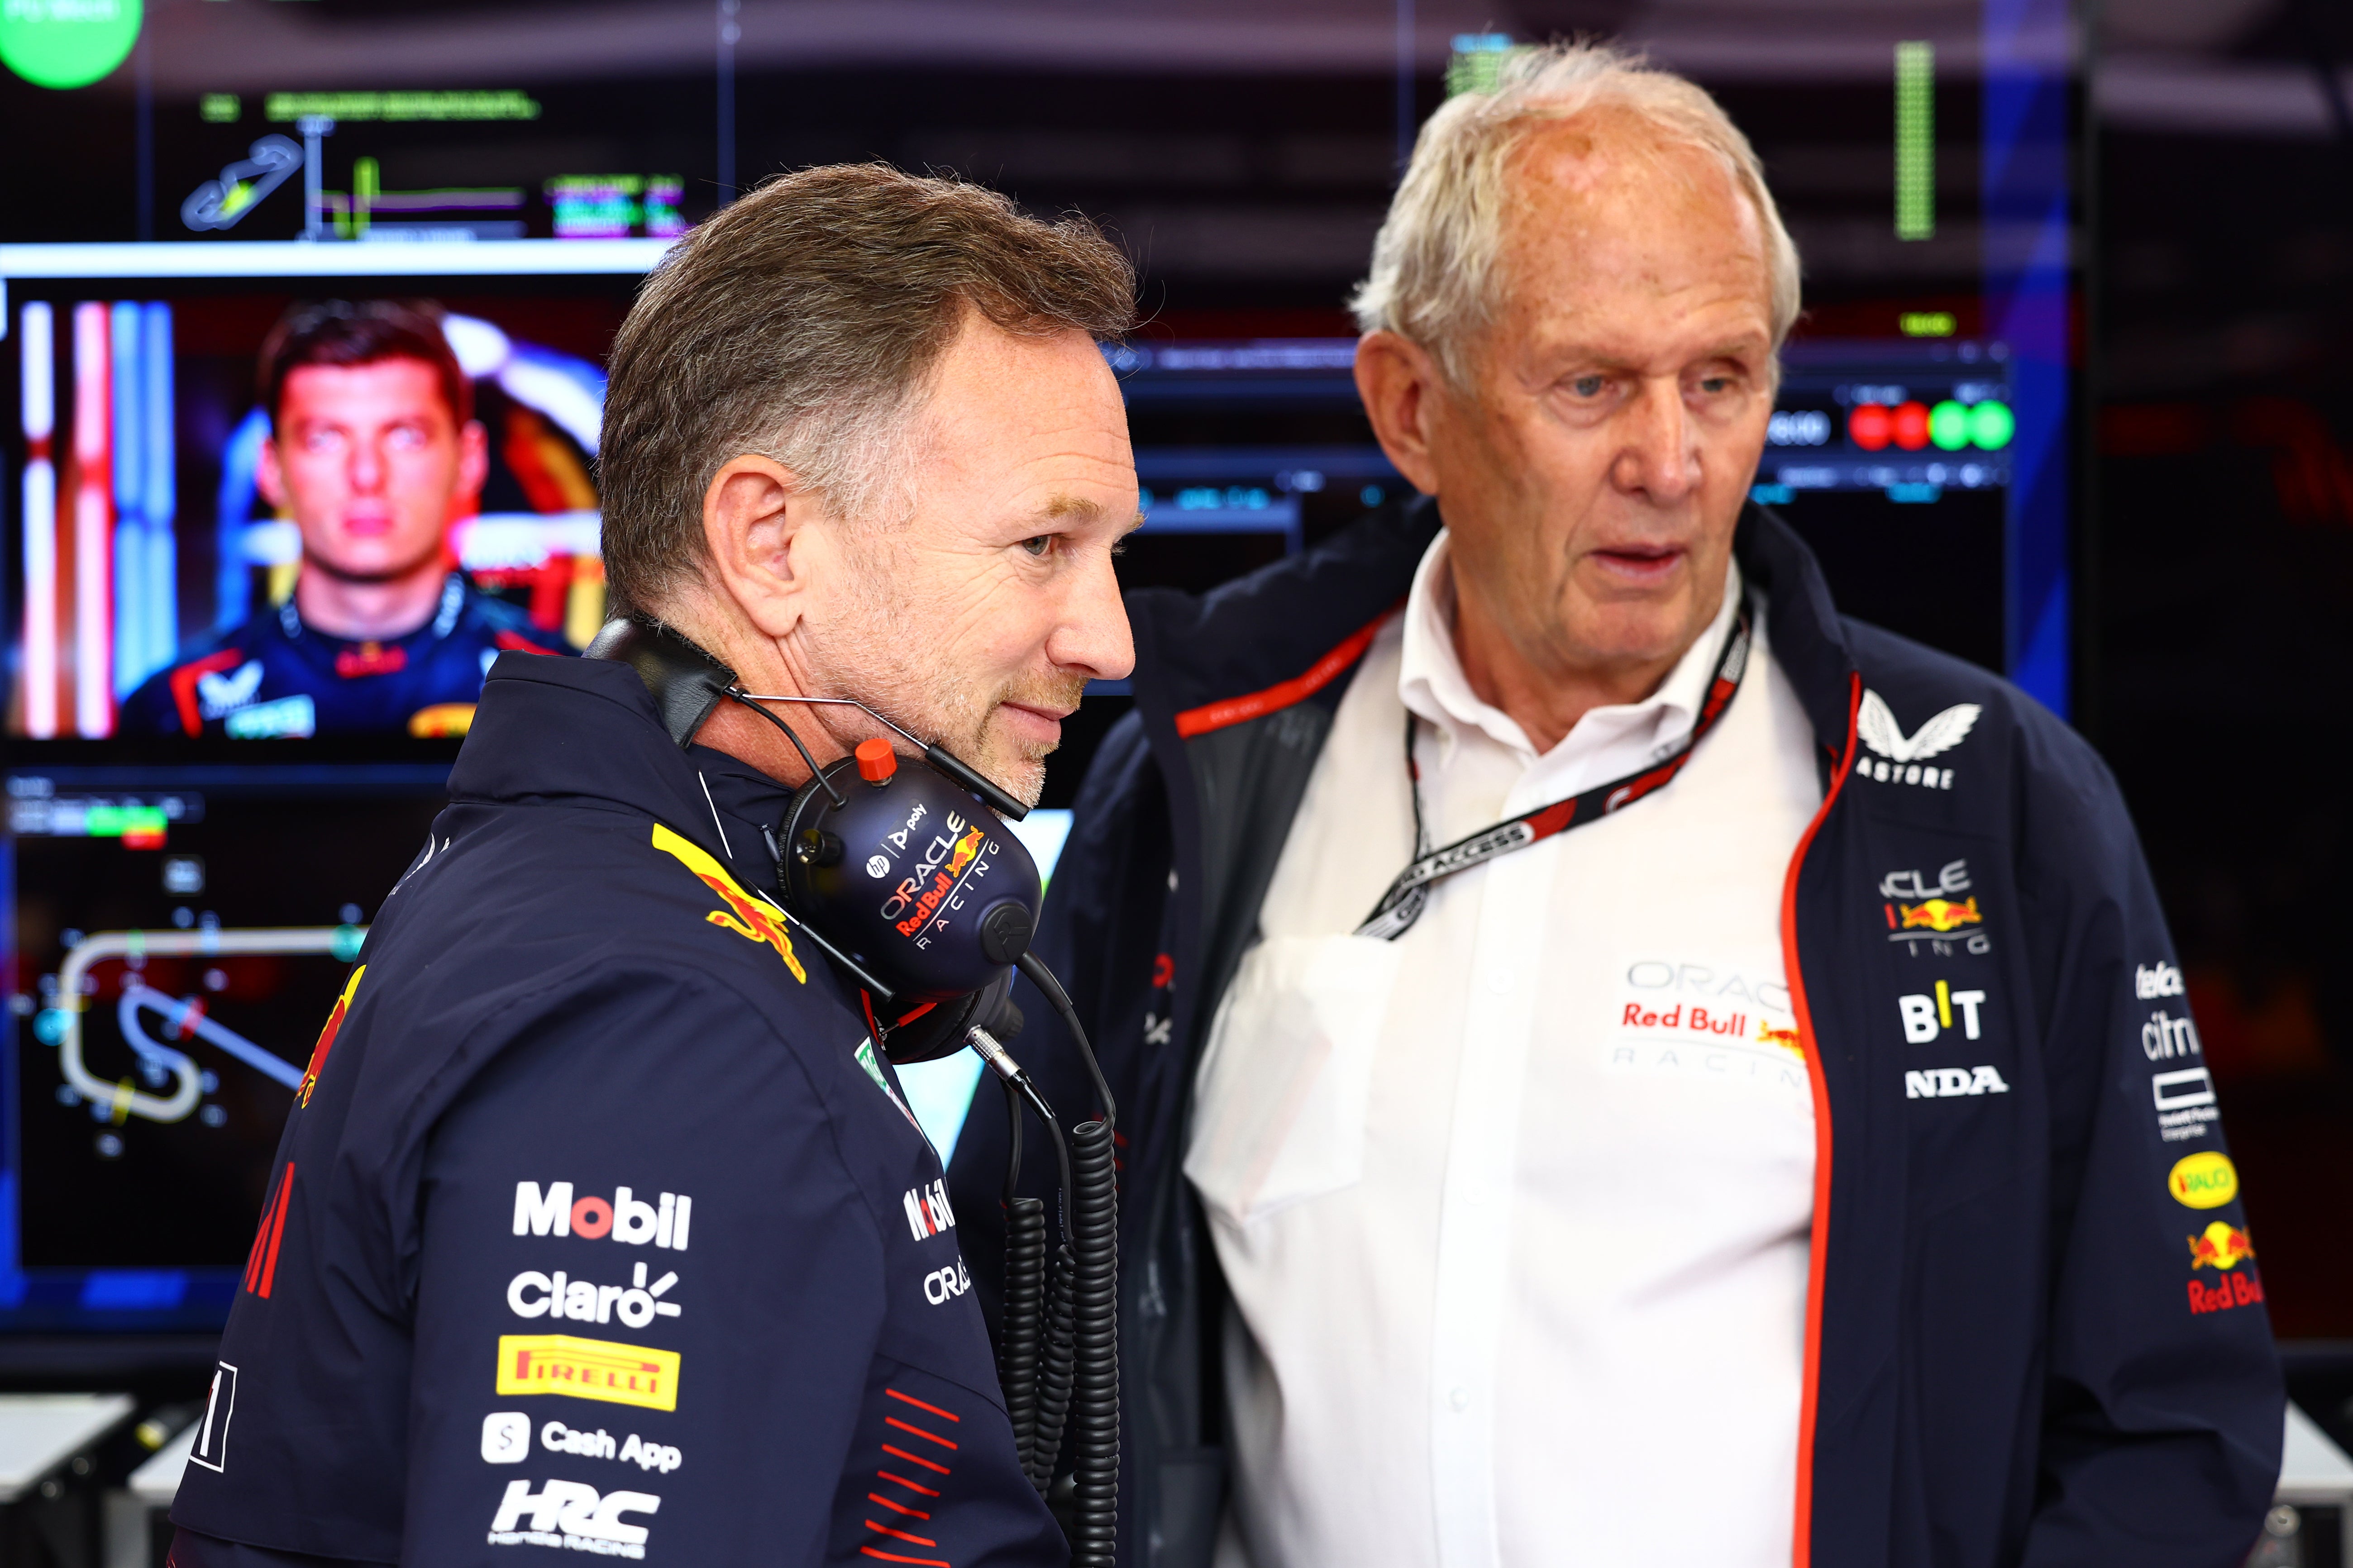 Helmut Marko has worked with Christian Horner for nearly two decades at Red Bull